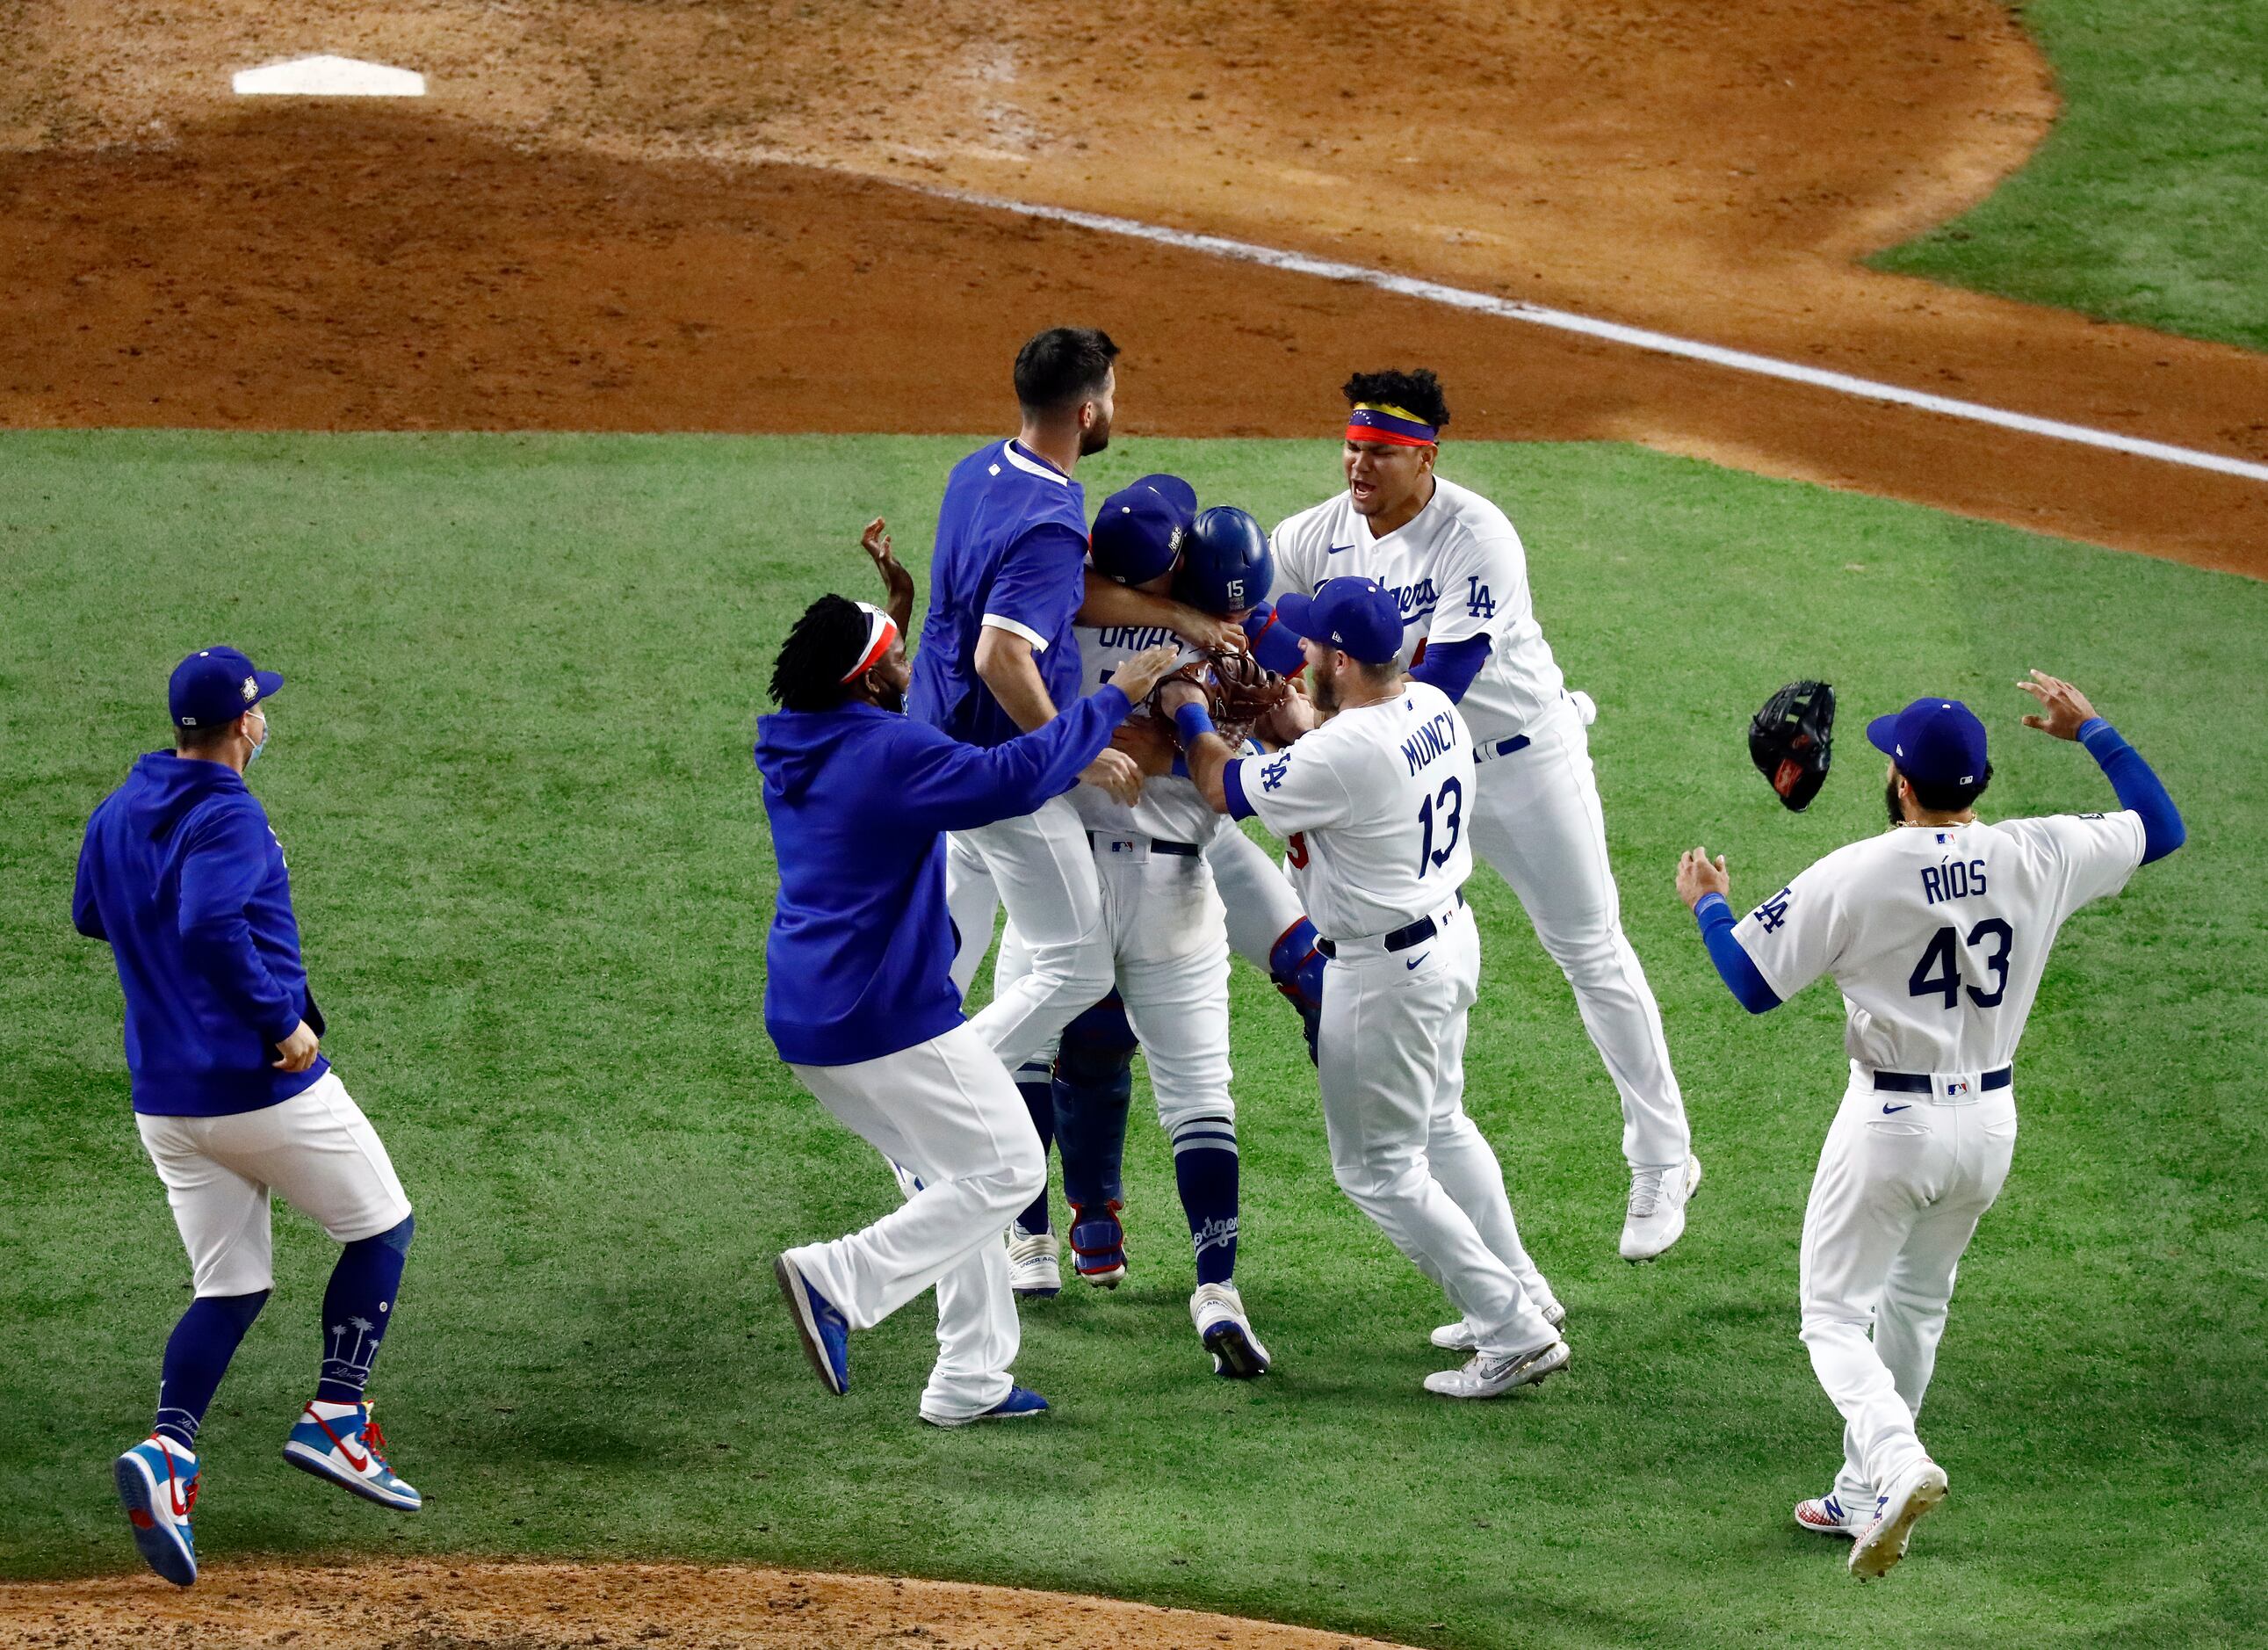 The Los Angeles Dodgers celebrate their World Series win over the Tampa Bay Rays in Game 6...